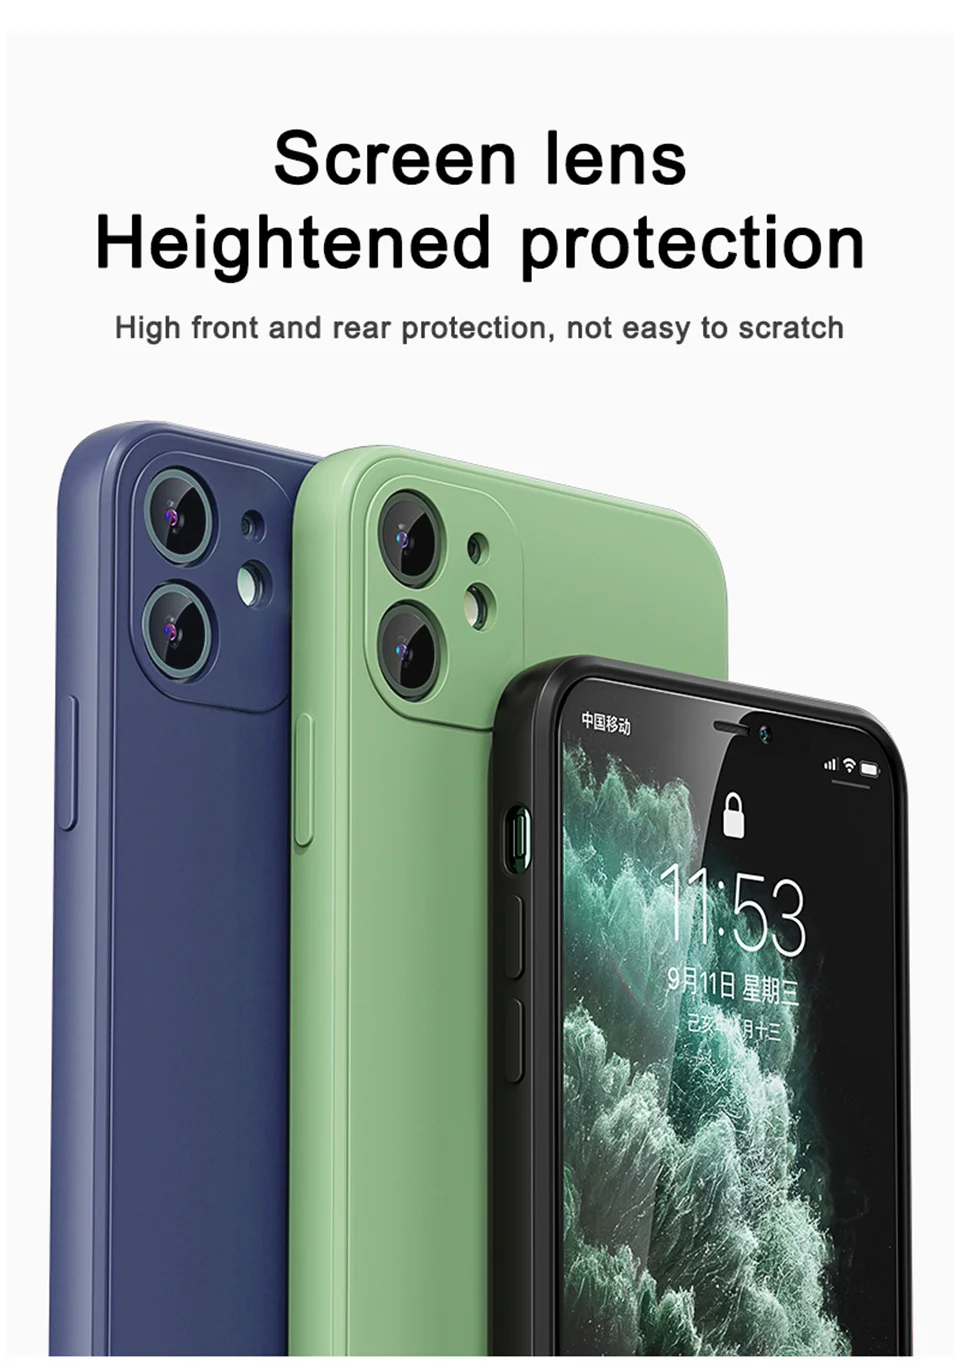 case for iphone se Luxury Liquid Silicone Shockproof Case for iPhone 11 12 Pro 7 8 Plus 6 6S 5 SE 2020 X XS XR Max Mini Back Soft Cover Funda cute iphone se cases